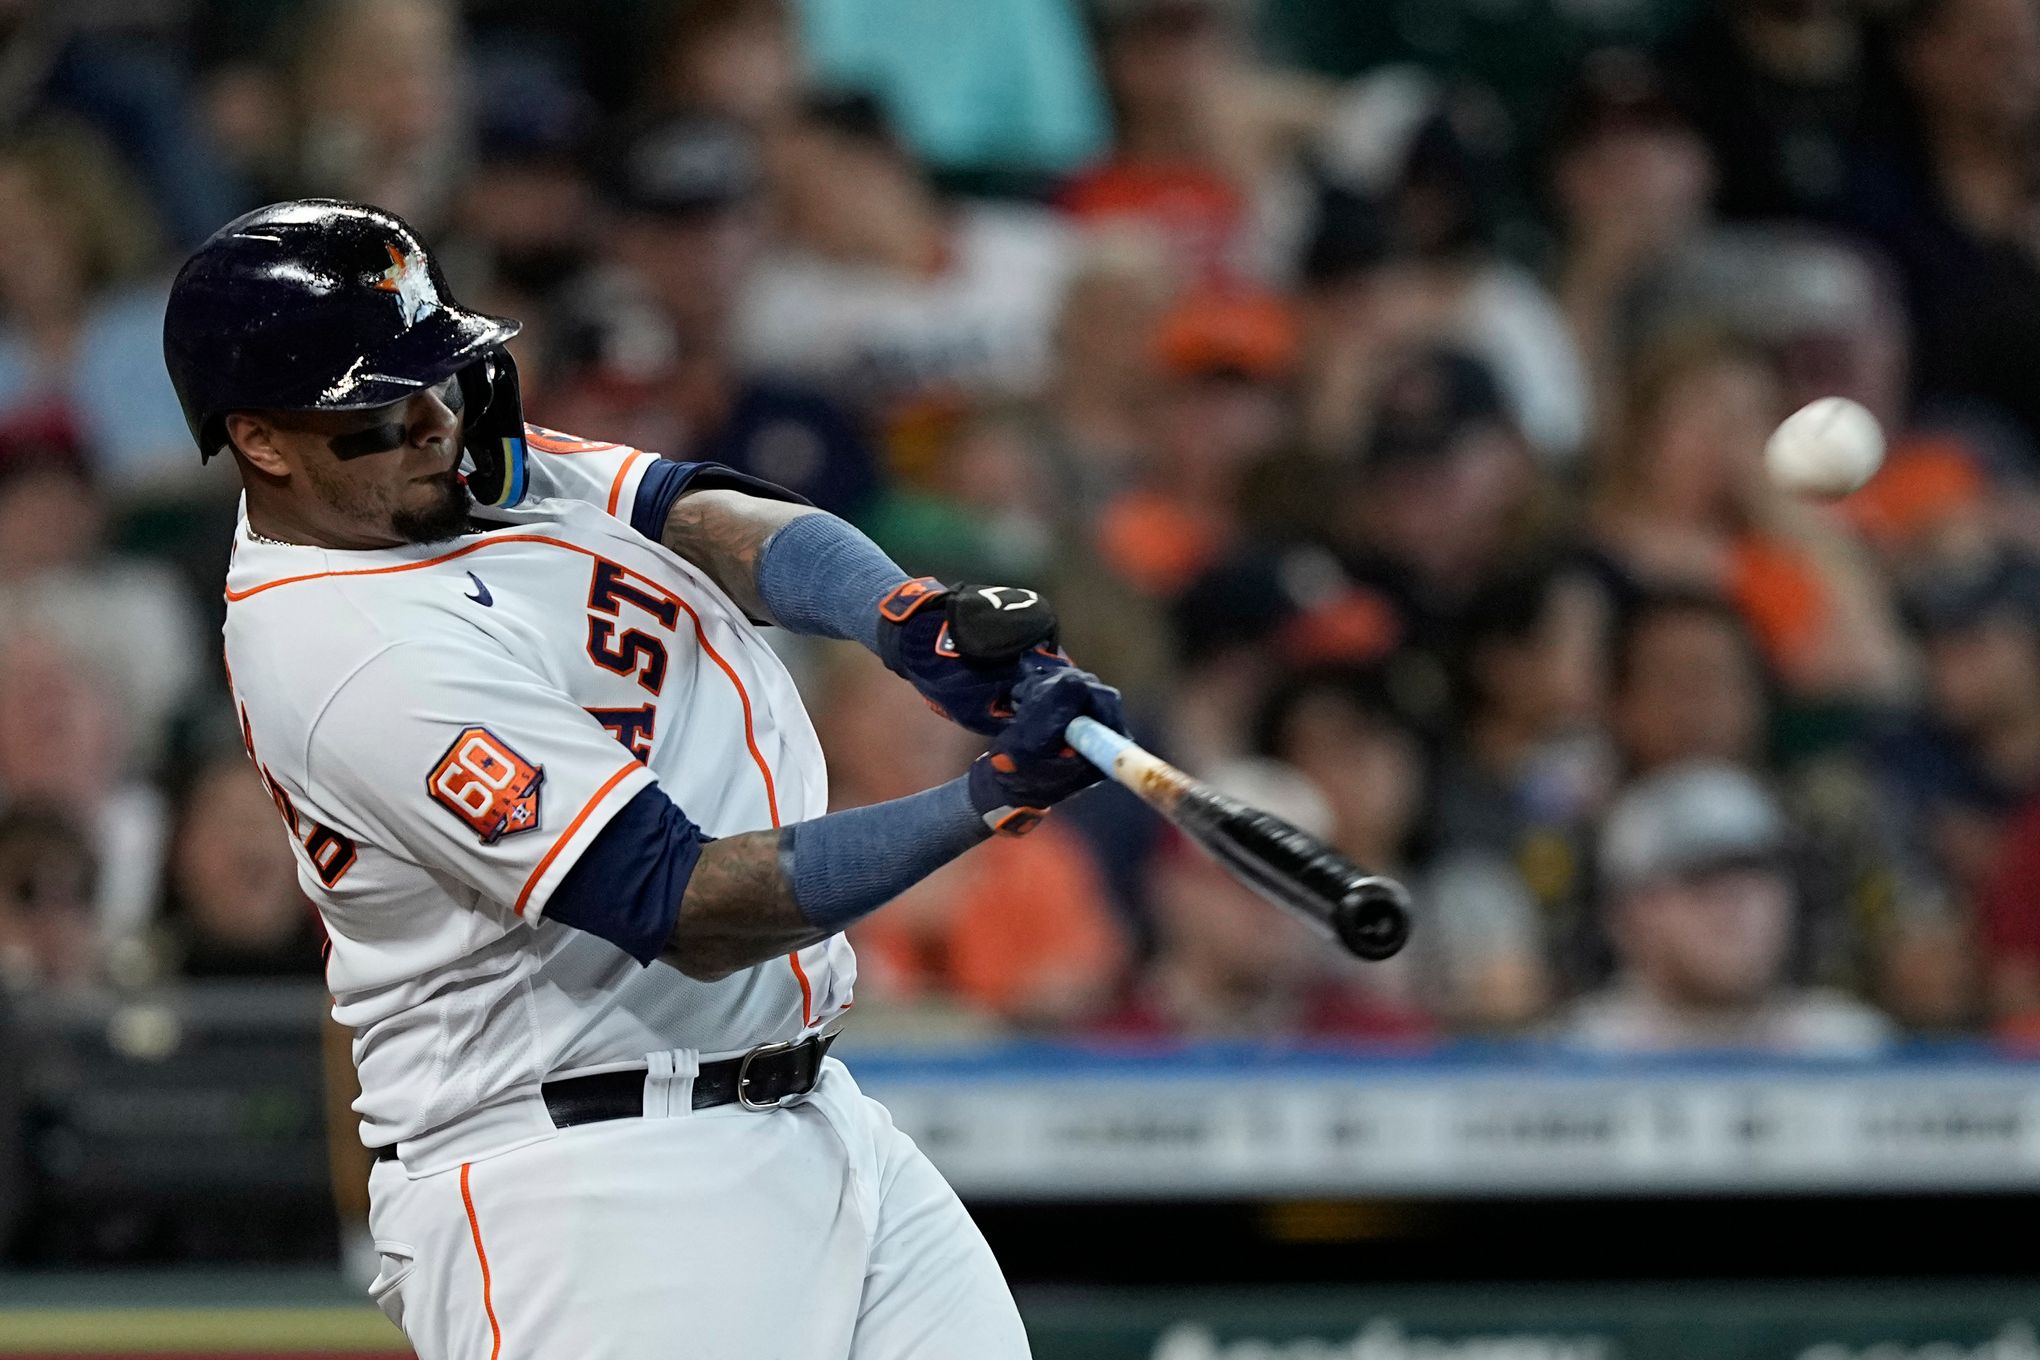 Altuve, Urquidy lead Astros to 9-1 victory over Angels - The San